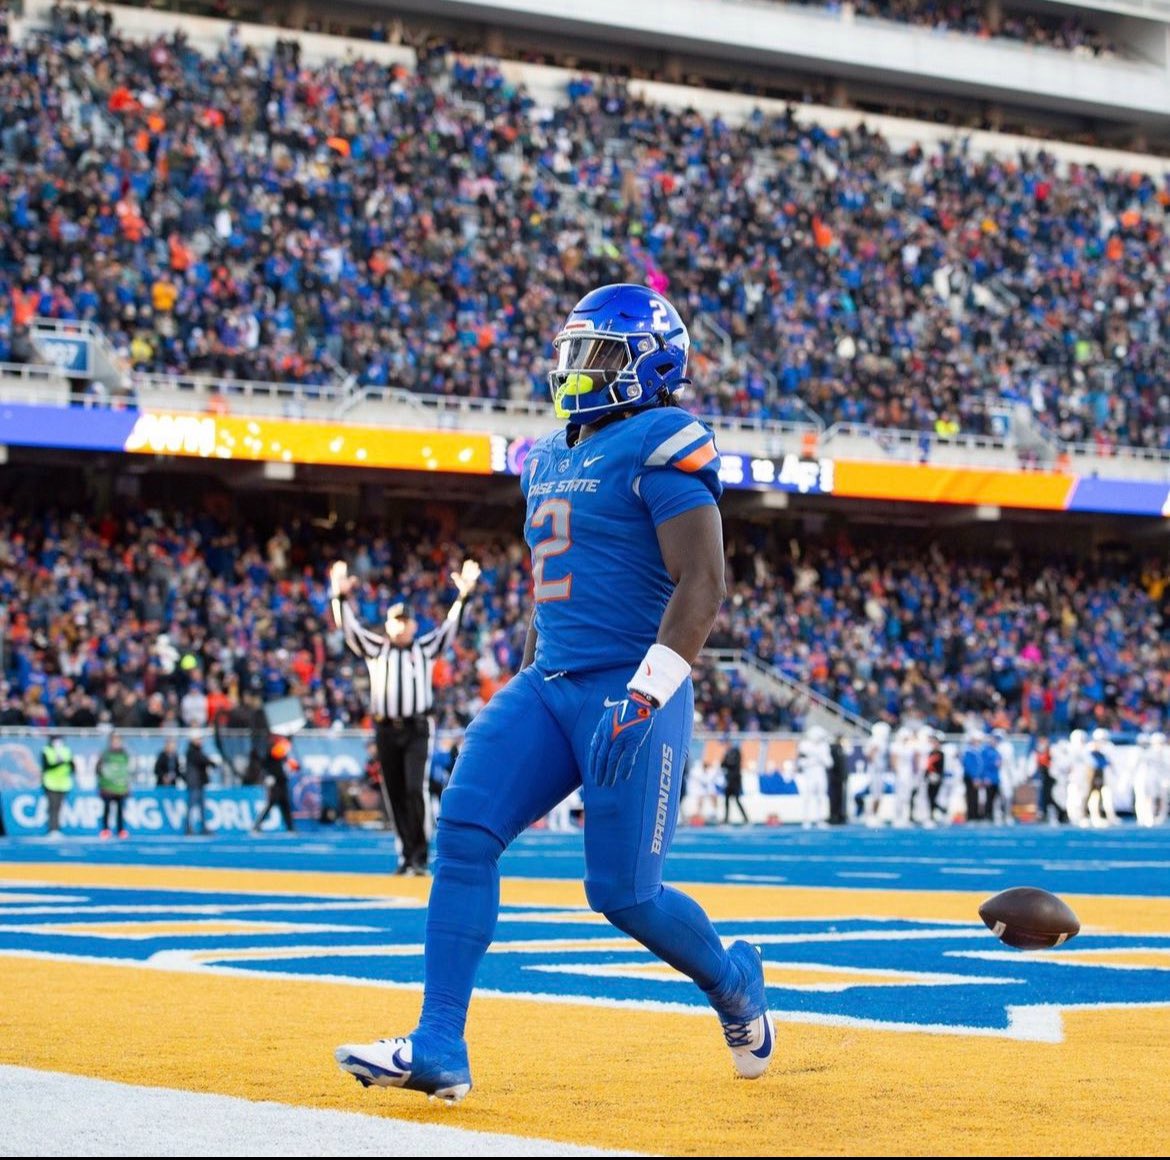 After a great conversation with @Coach_SD I am blessed to receive an offer from Boise state!!@ContrerasDVOFOD @DVFootballOFOD